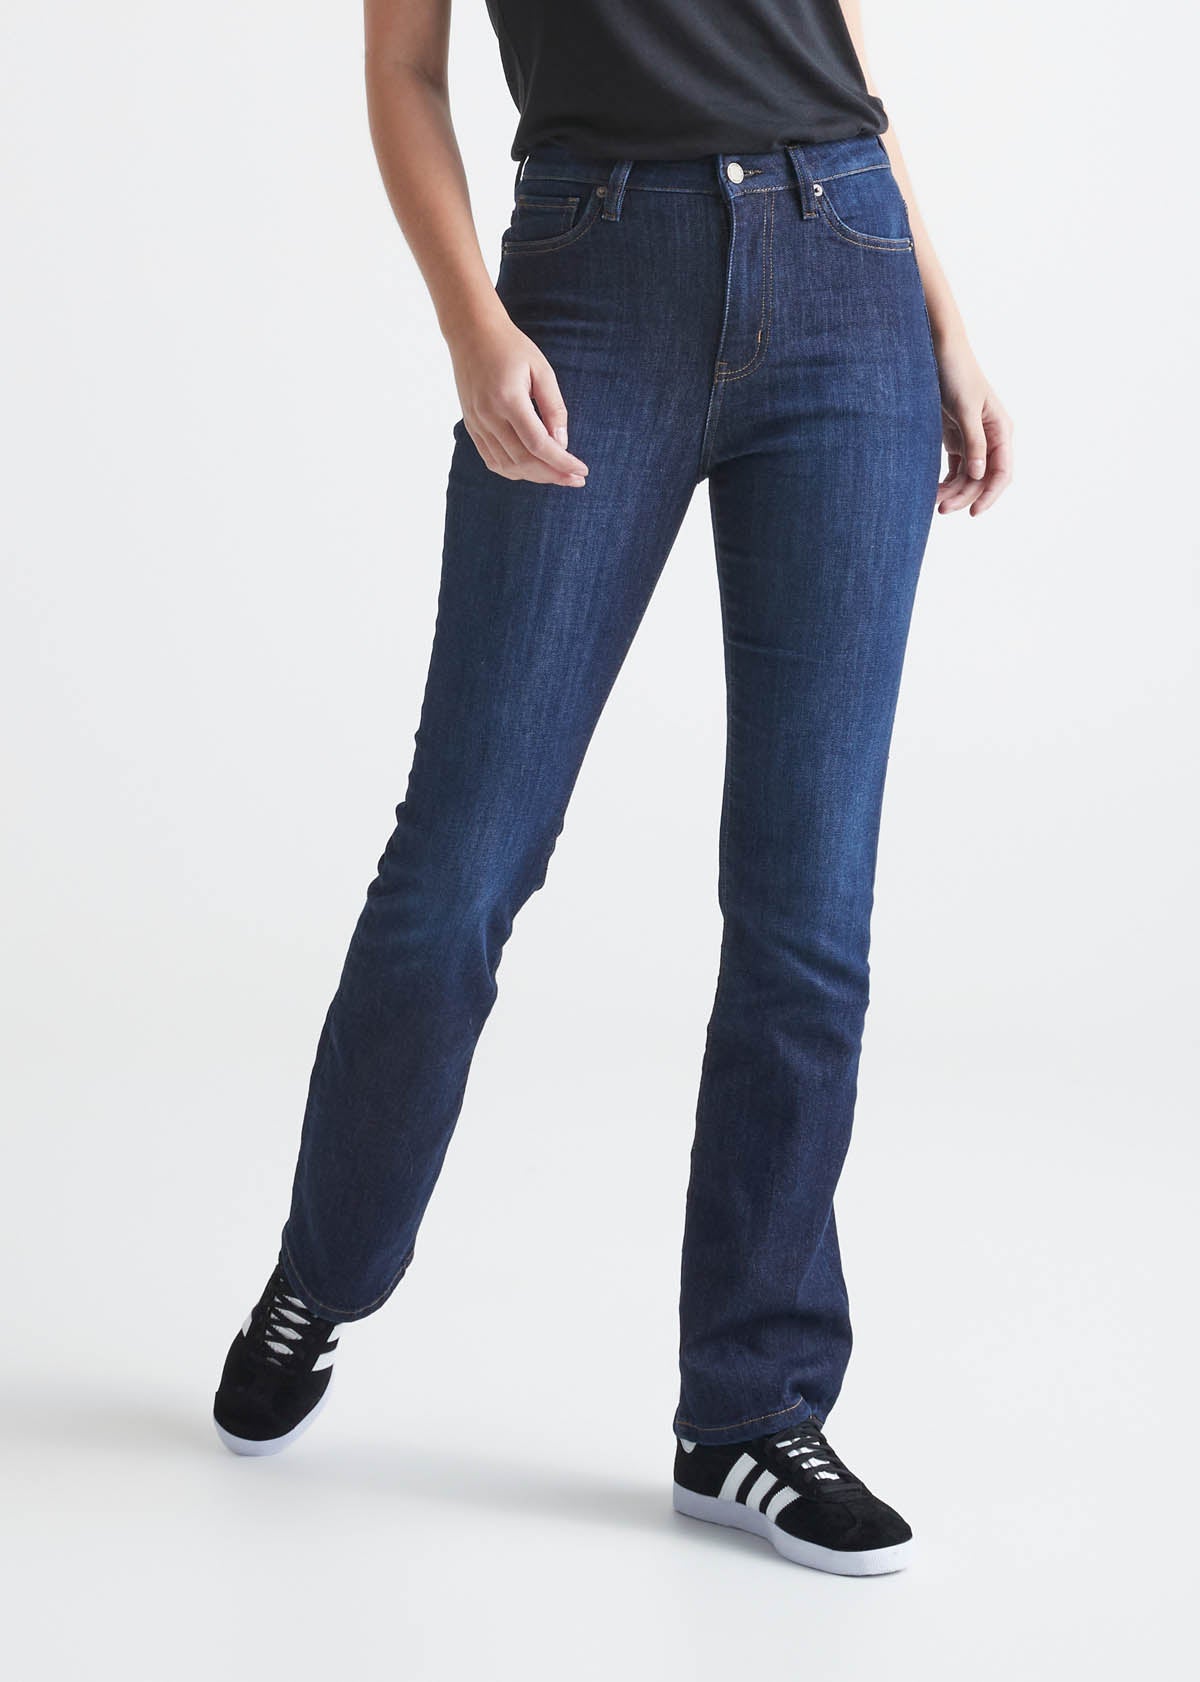 girls low rise bootcut jeans | girls bottoms | Abercrombie.com